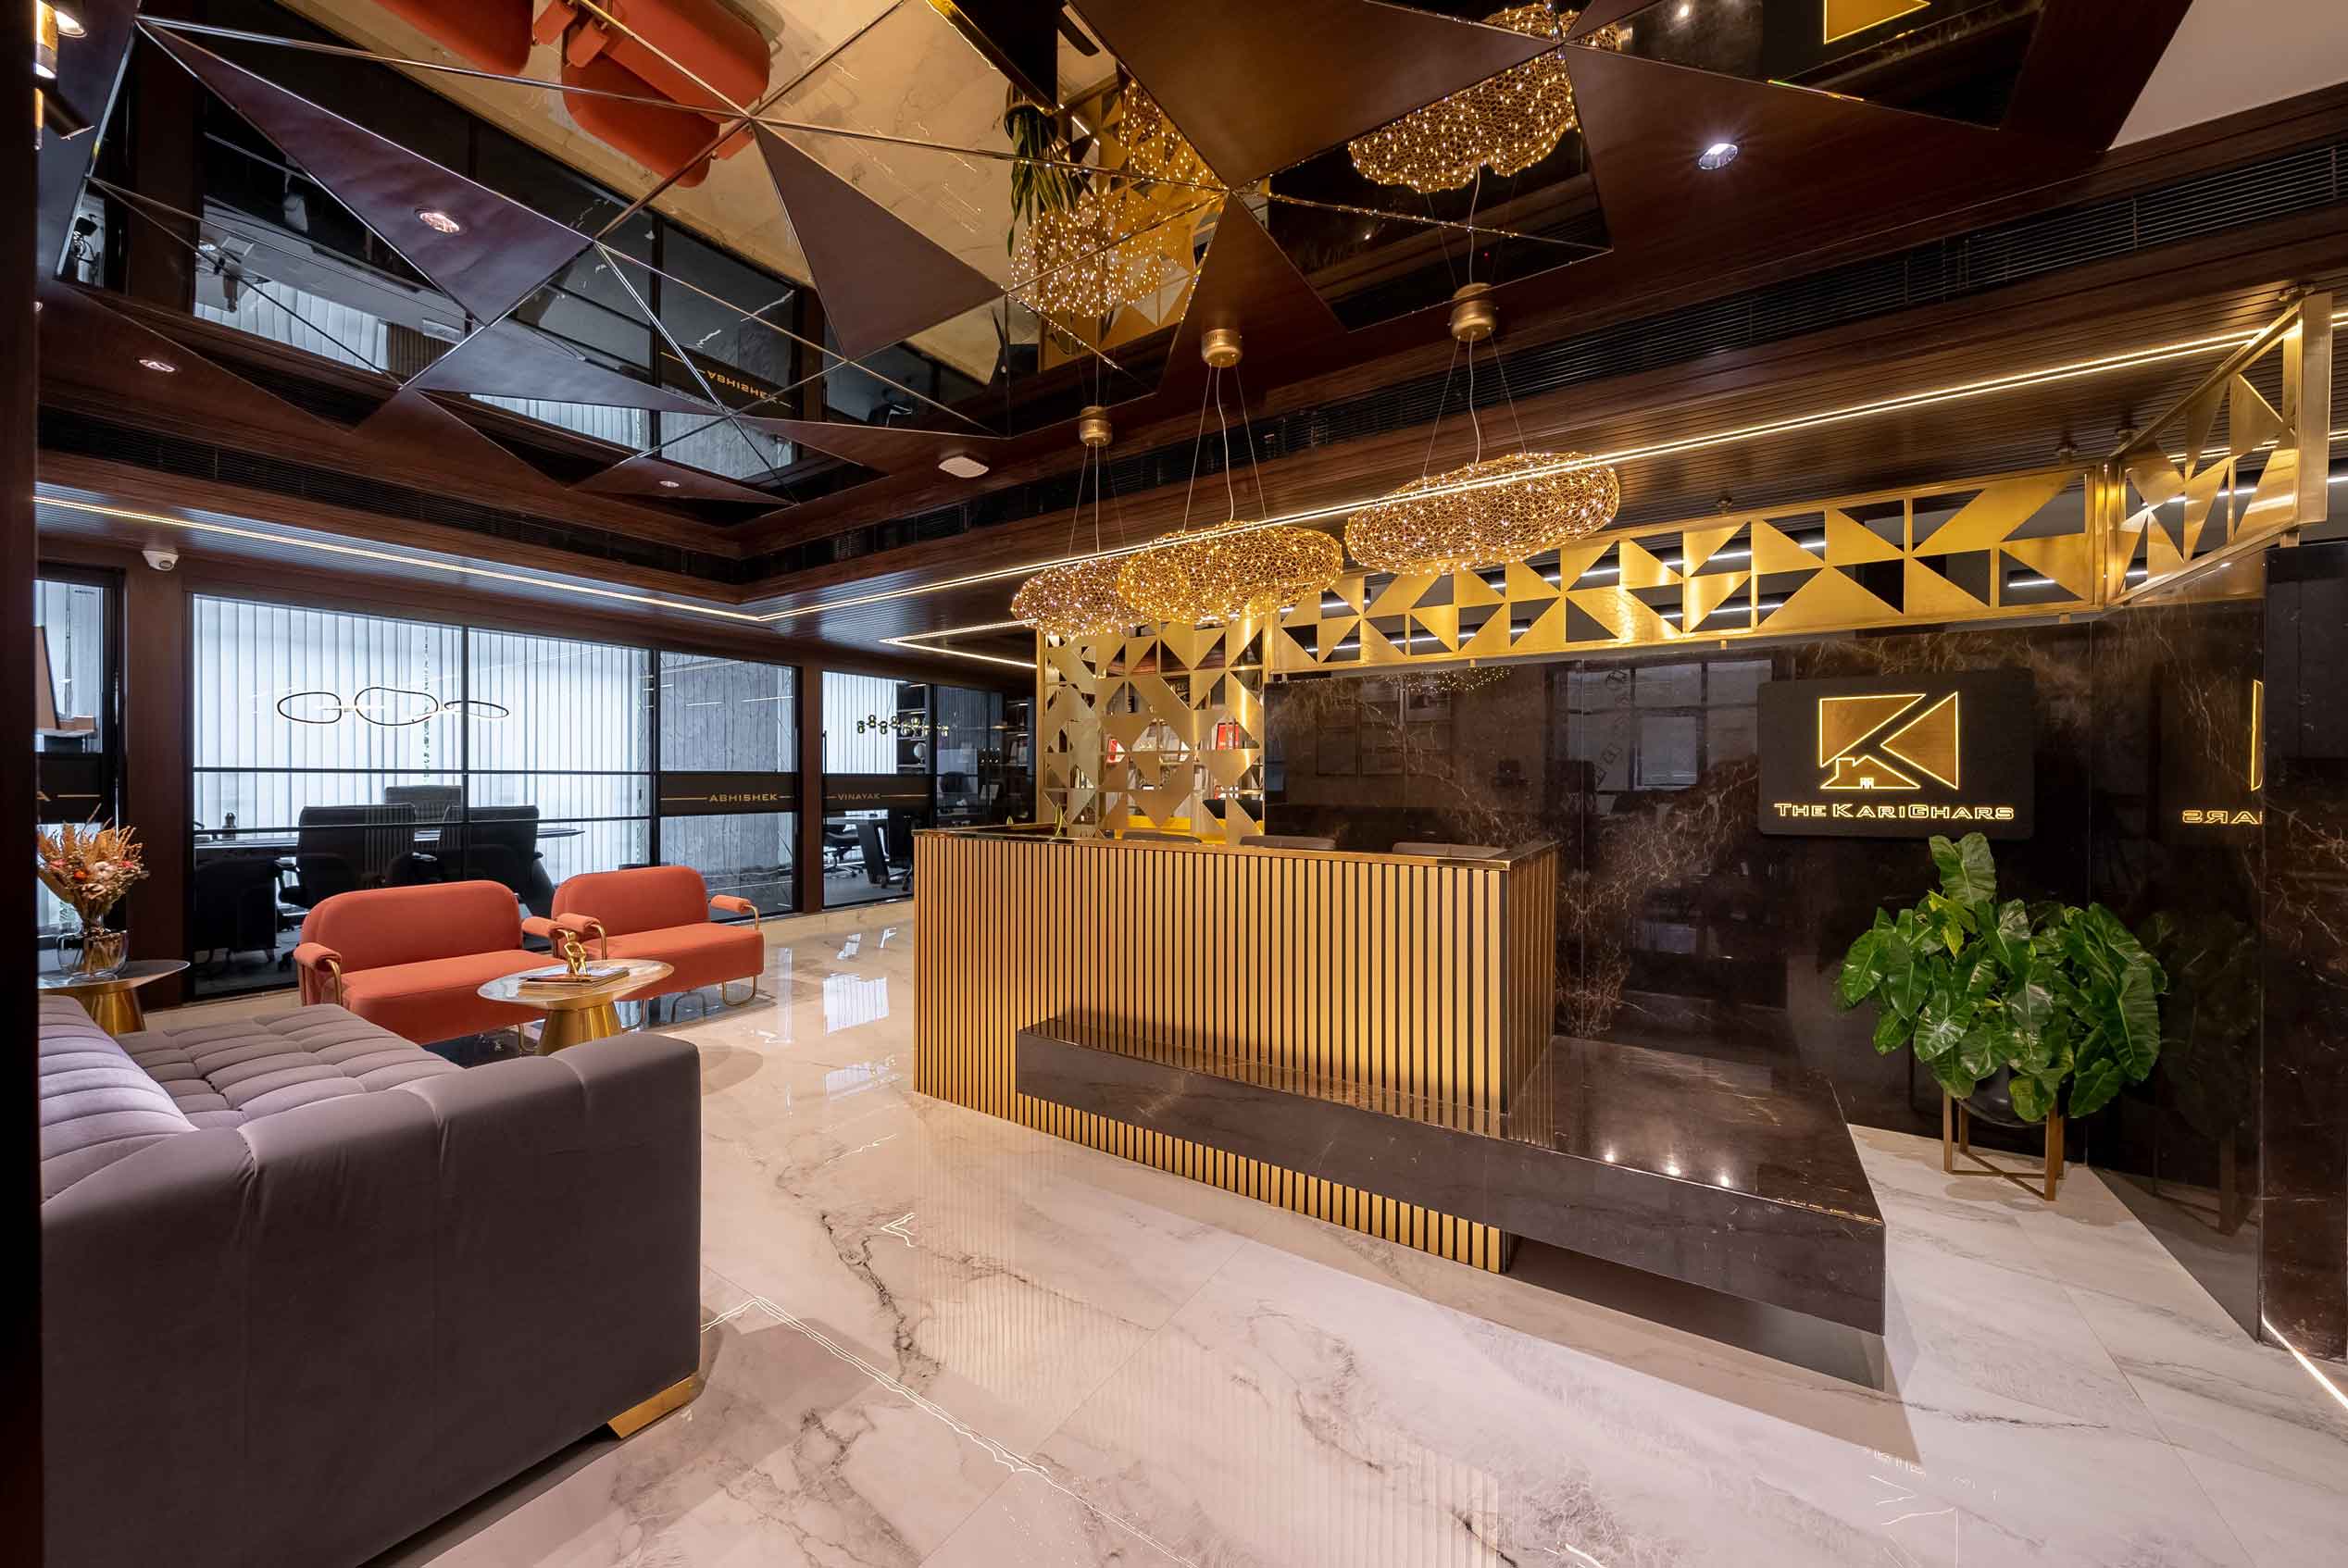 Experience Centre of Bangalore based interior design firm The KariGhars